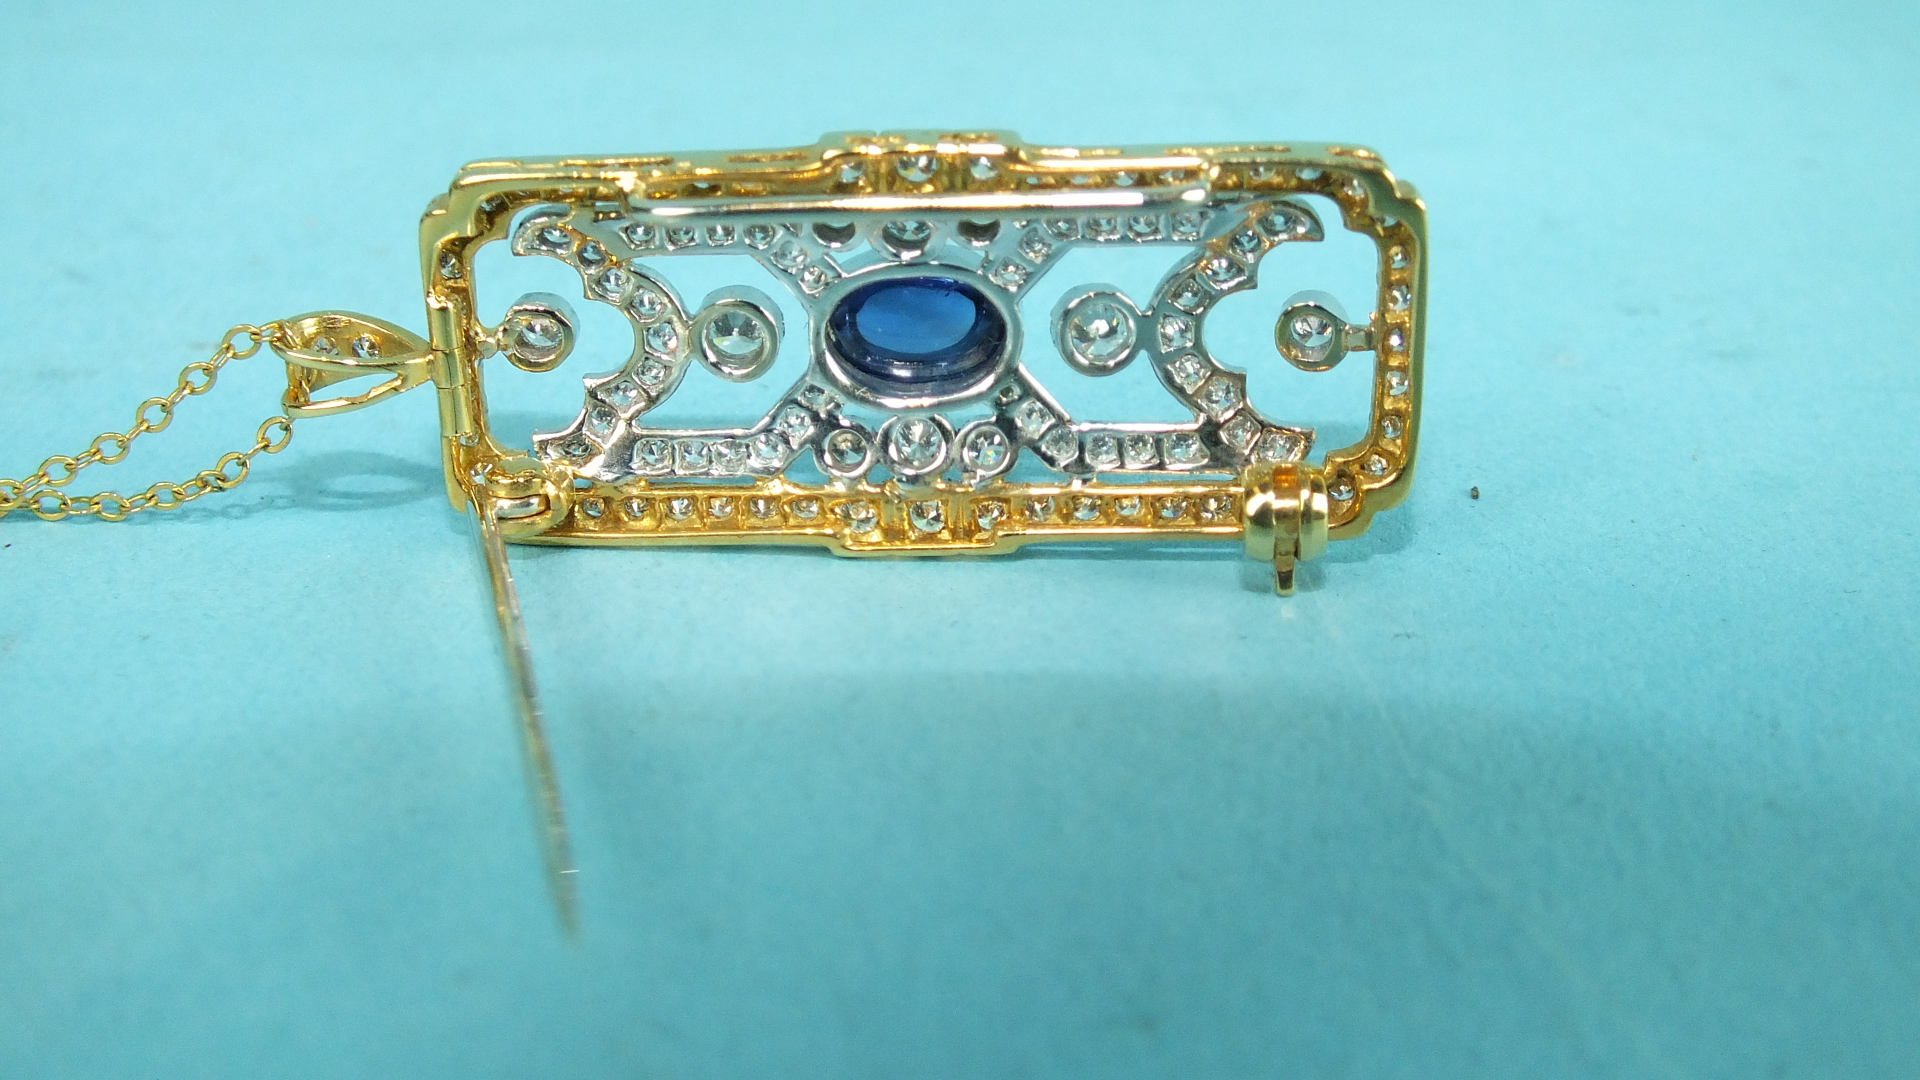 An Art-Deco-style sapphire and diamond brooch pendant centrally-set a cabochon sapphire in a - Image 2 of 2